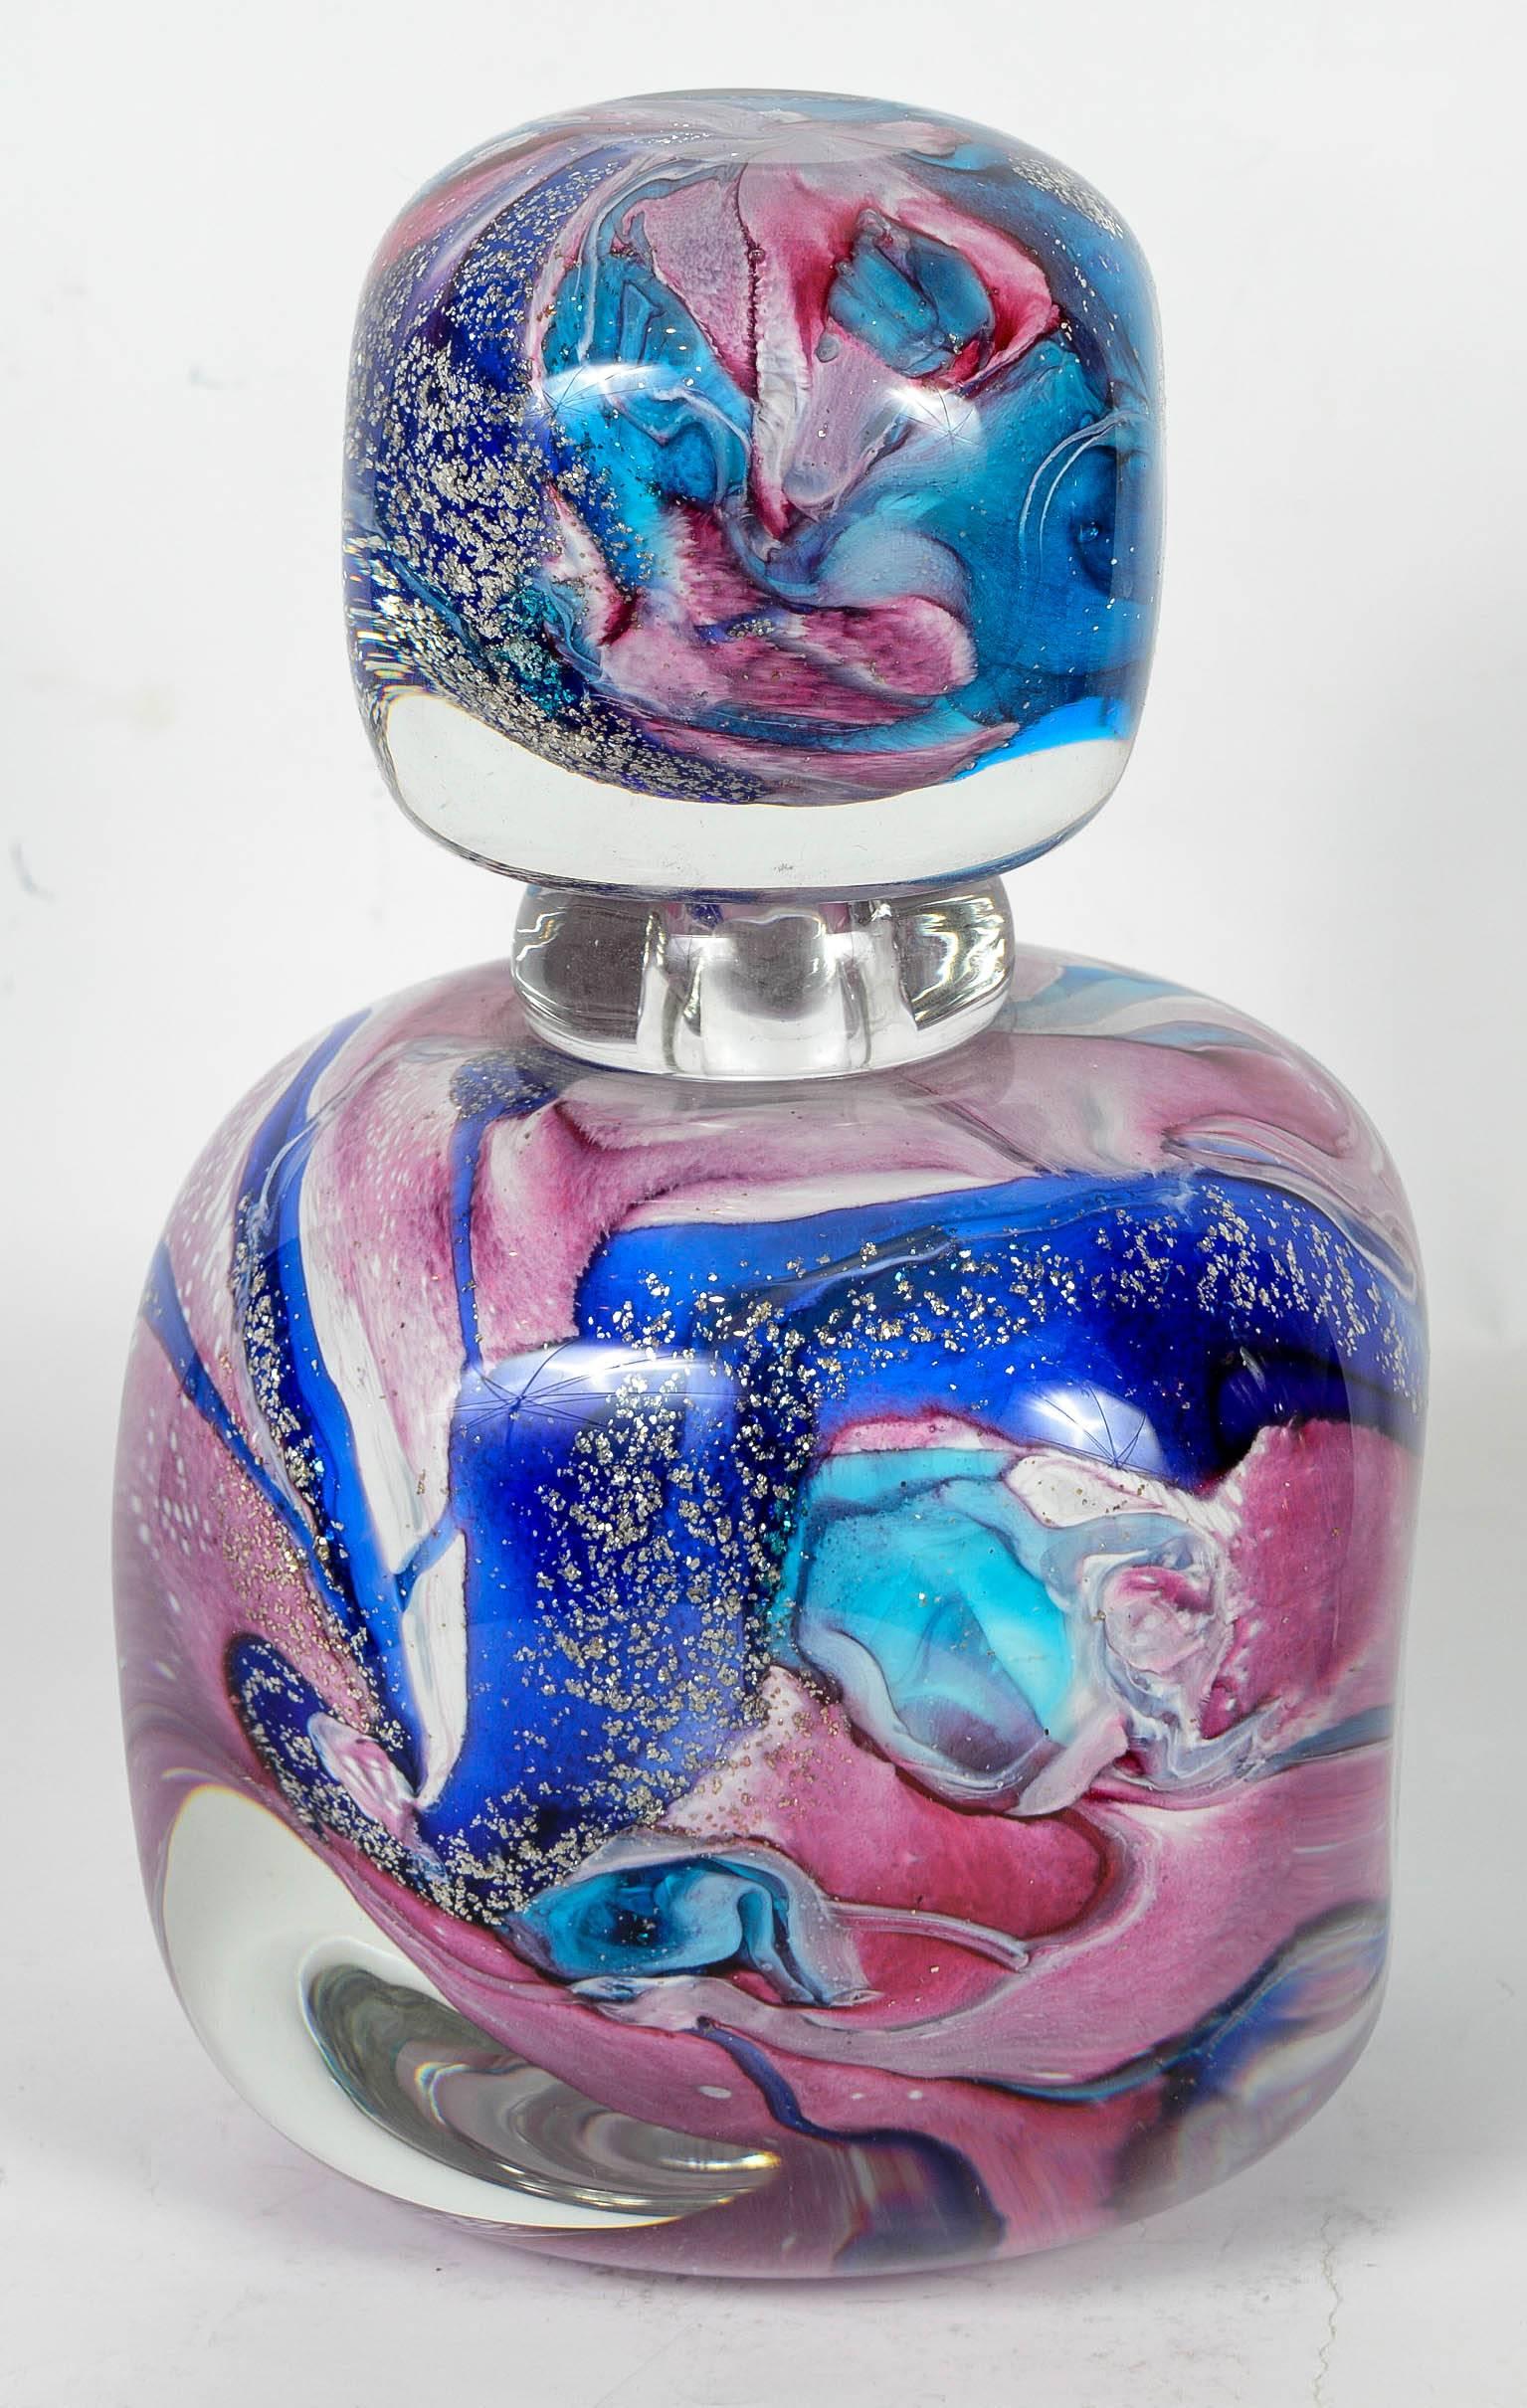 Pair of Perfume Bottles in Murano Glass, Signed by Michele Onesto 1